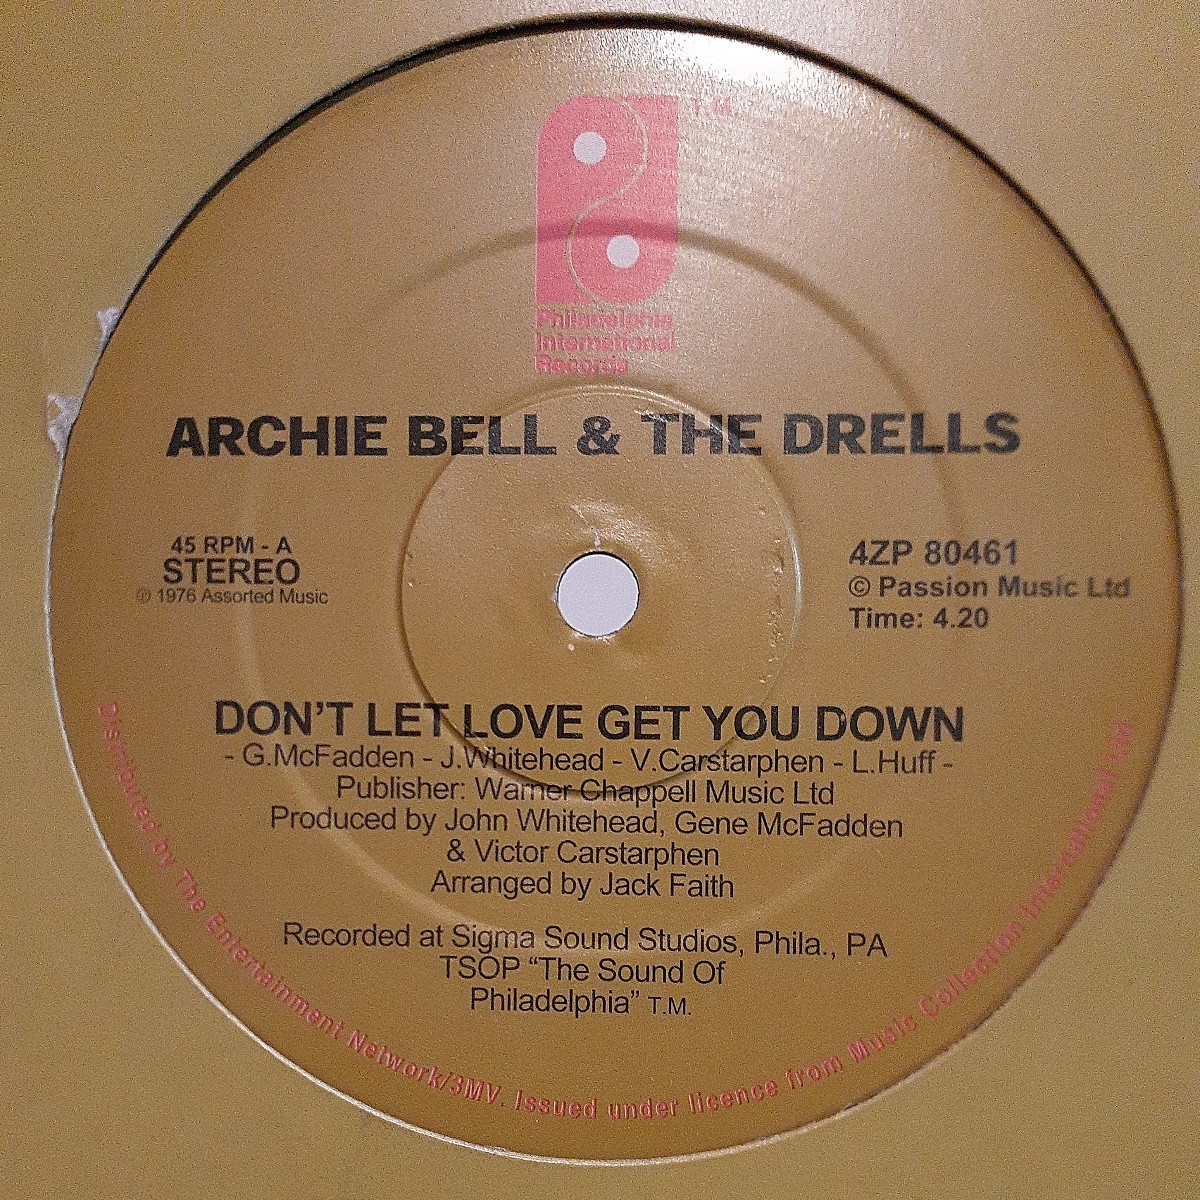 ARCHIE BELL & THE DRELLS / DON'T LET LOVE GET YOU DOWN / BILLY PAUL / BRING THE FAMILY BACK /DJ NORI,MURO,A TRIBE CALLED QUEST の画像1